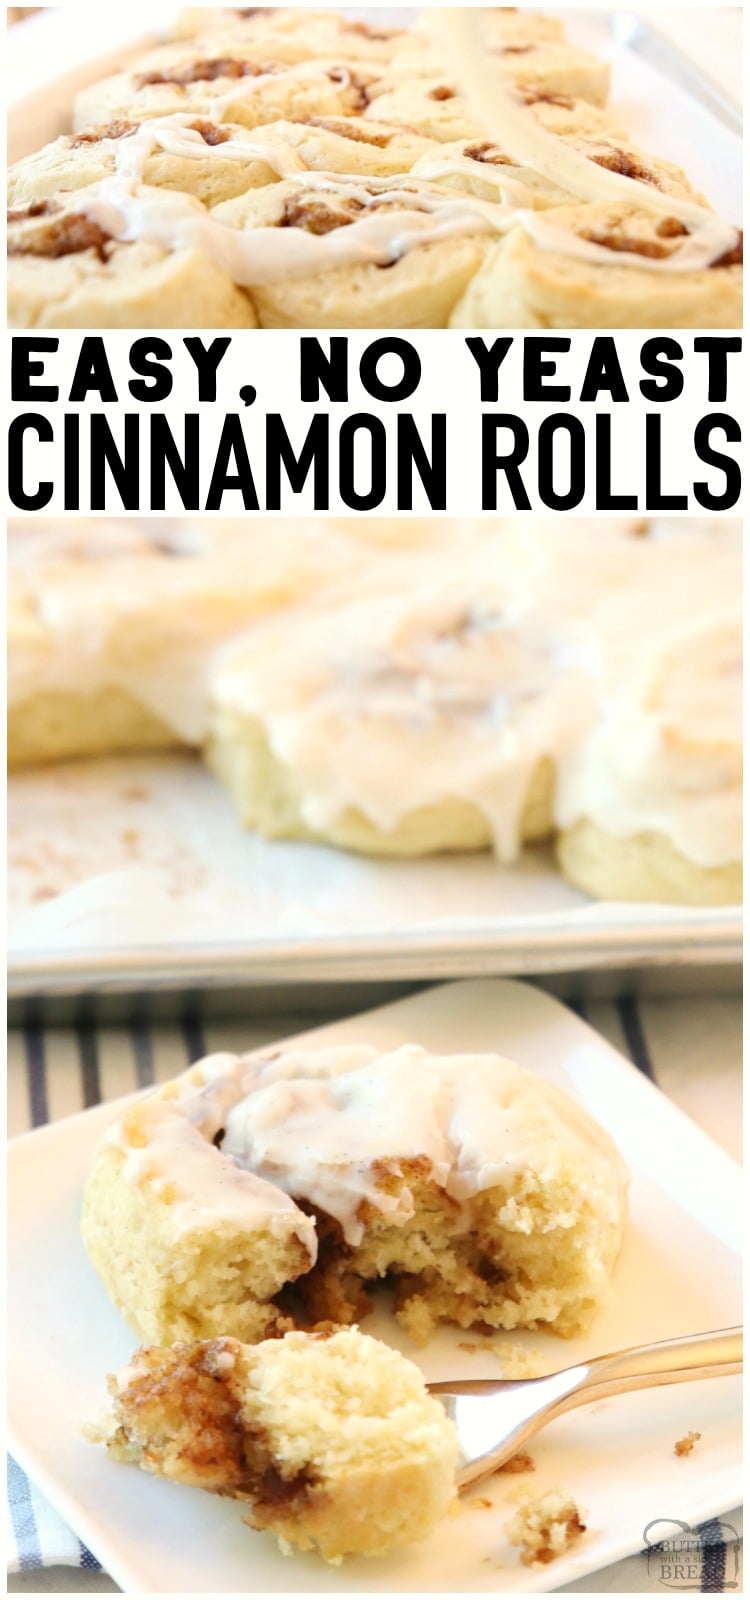 No Yeast Cinnamon Rolls that comes together in minutes and are light, fluffy and amazing! Great texture and cinnamon flavor in this quick & easy cinnamon roll recipe.